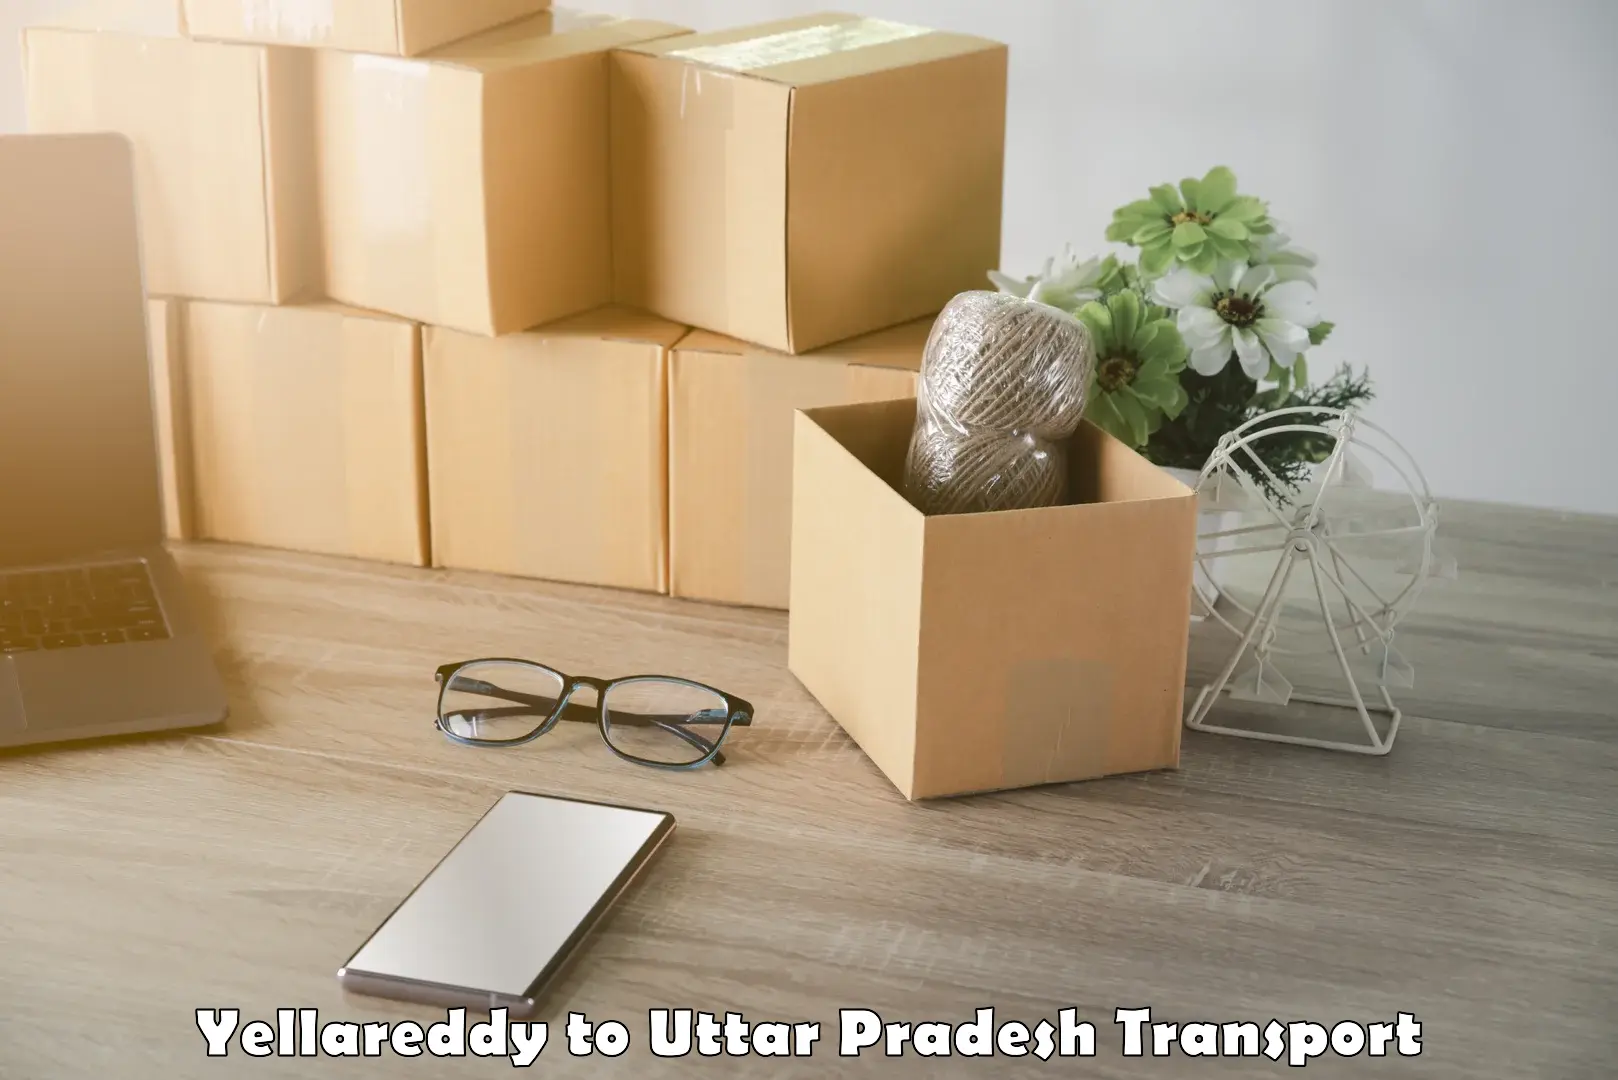 Two wheeler parcel service Yellareddy to Lucknow